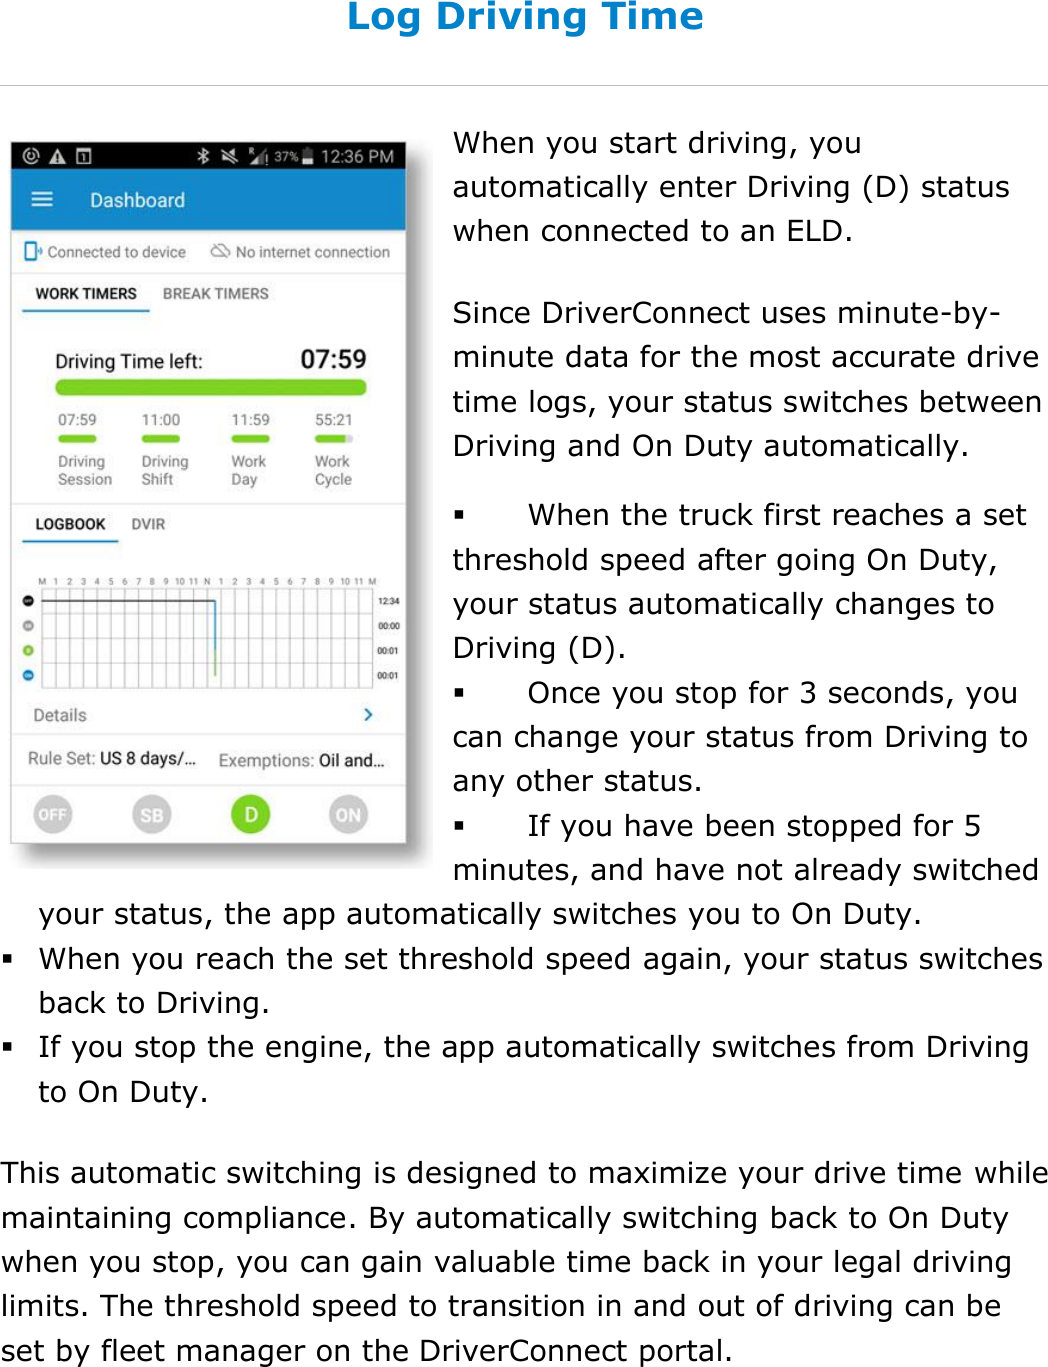 Set My Duty Status DriverConnect User Guide  32 © 2016-2017, Rand McNally, Inc. Log Driving Time When you start driving, you automatically enter Driving (D) status when connected to an ELD. Since DriverConnect uses minute-by-minute data for the most accurate drive time logs, your status switches between Driving and On Duty automatically.  When the truck first reaches a set threshold speed after going On Duty, your status automatically changes to Driving (D).   Once you stop for 3 seconds, you can change your status from Driving to any other status.  If you have been stopped for 5 minutes, and have not already switched your status, the app automatically switches you to On Duty.  When you reach the set threshold speed again, your status switches back to Driving.  If you stop the engine, the app automatically switches from Driving to On Duty. This automatic switching is designed to maximize your drive time while maintaining compliance. By automatically switching back to On Duty when you stop, you can gain valuable time back in your legal driving limits. The threshold speed to transition in and out of driving can be set by fleet manager on the DriverConnect portal.    